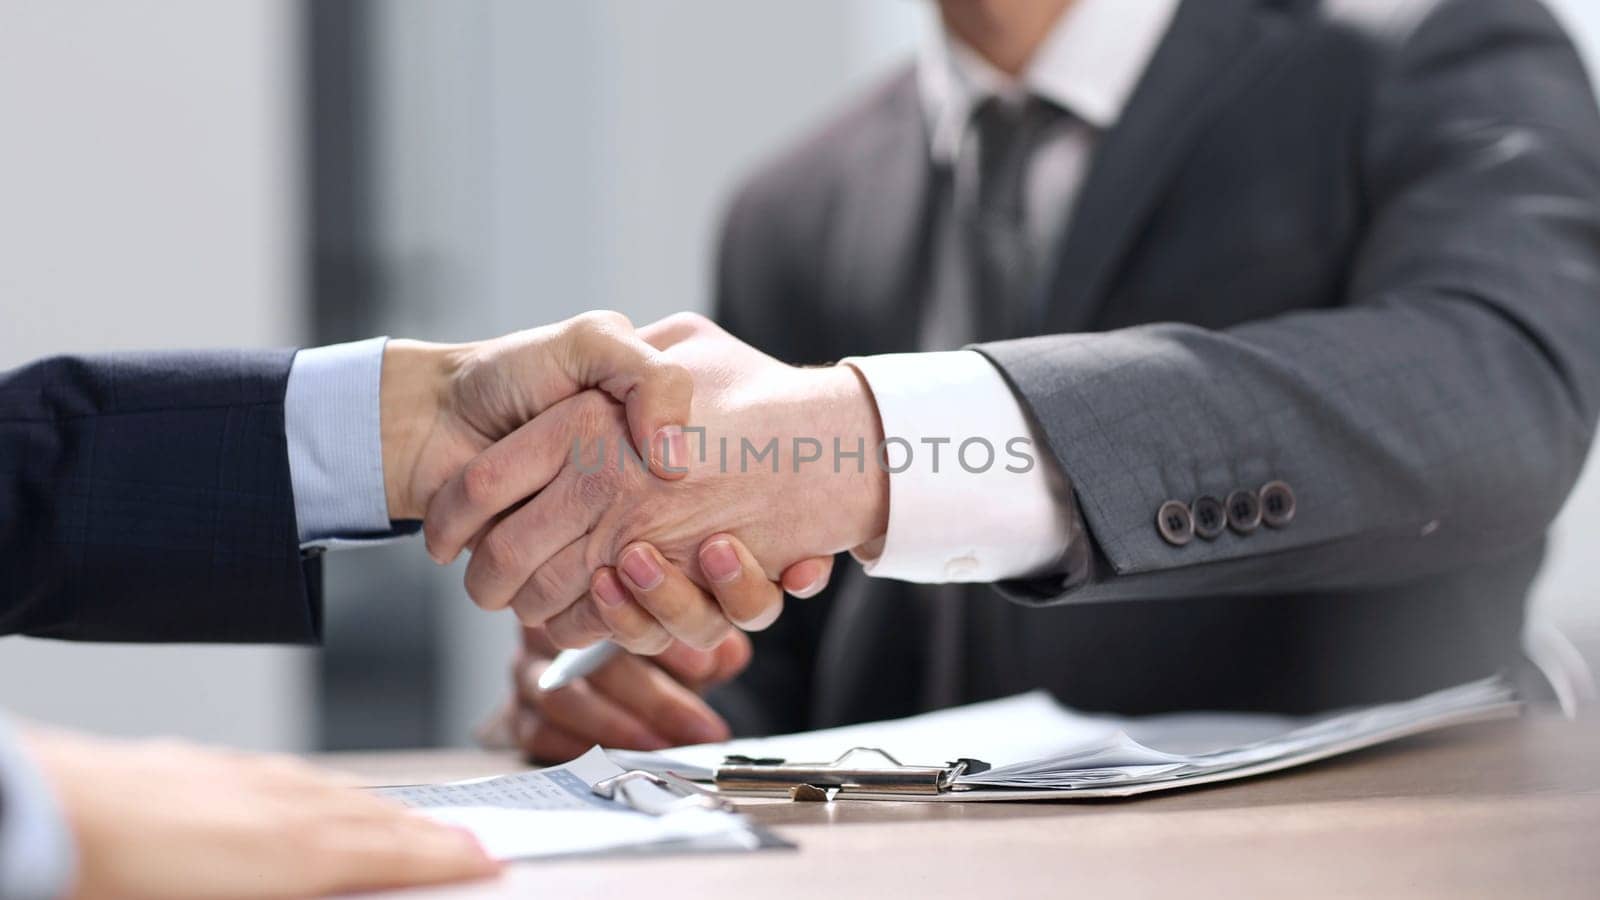 Discussion of documents on the deal and handshake by Prosto